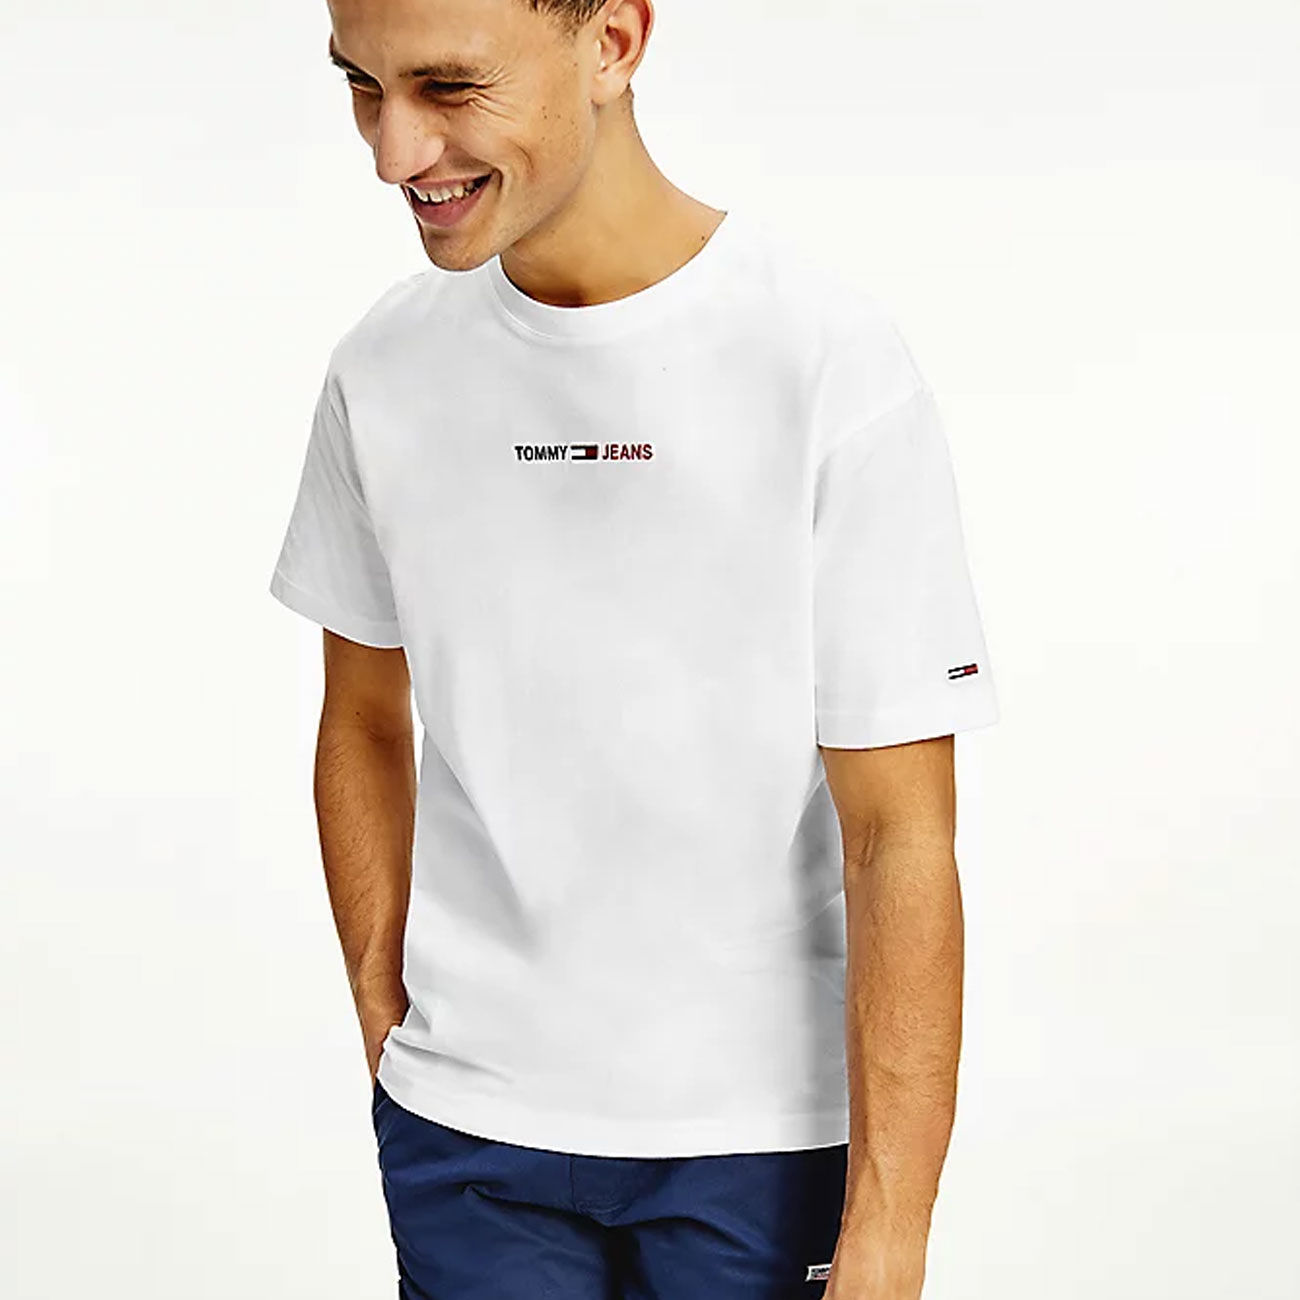 TOMMY JEANS T-SHIRT LINEAR EMBROIDERED White | Mascheroni Store